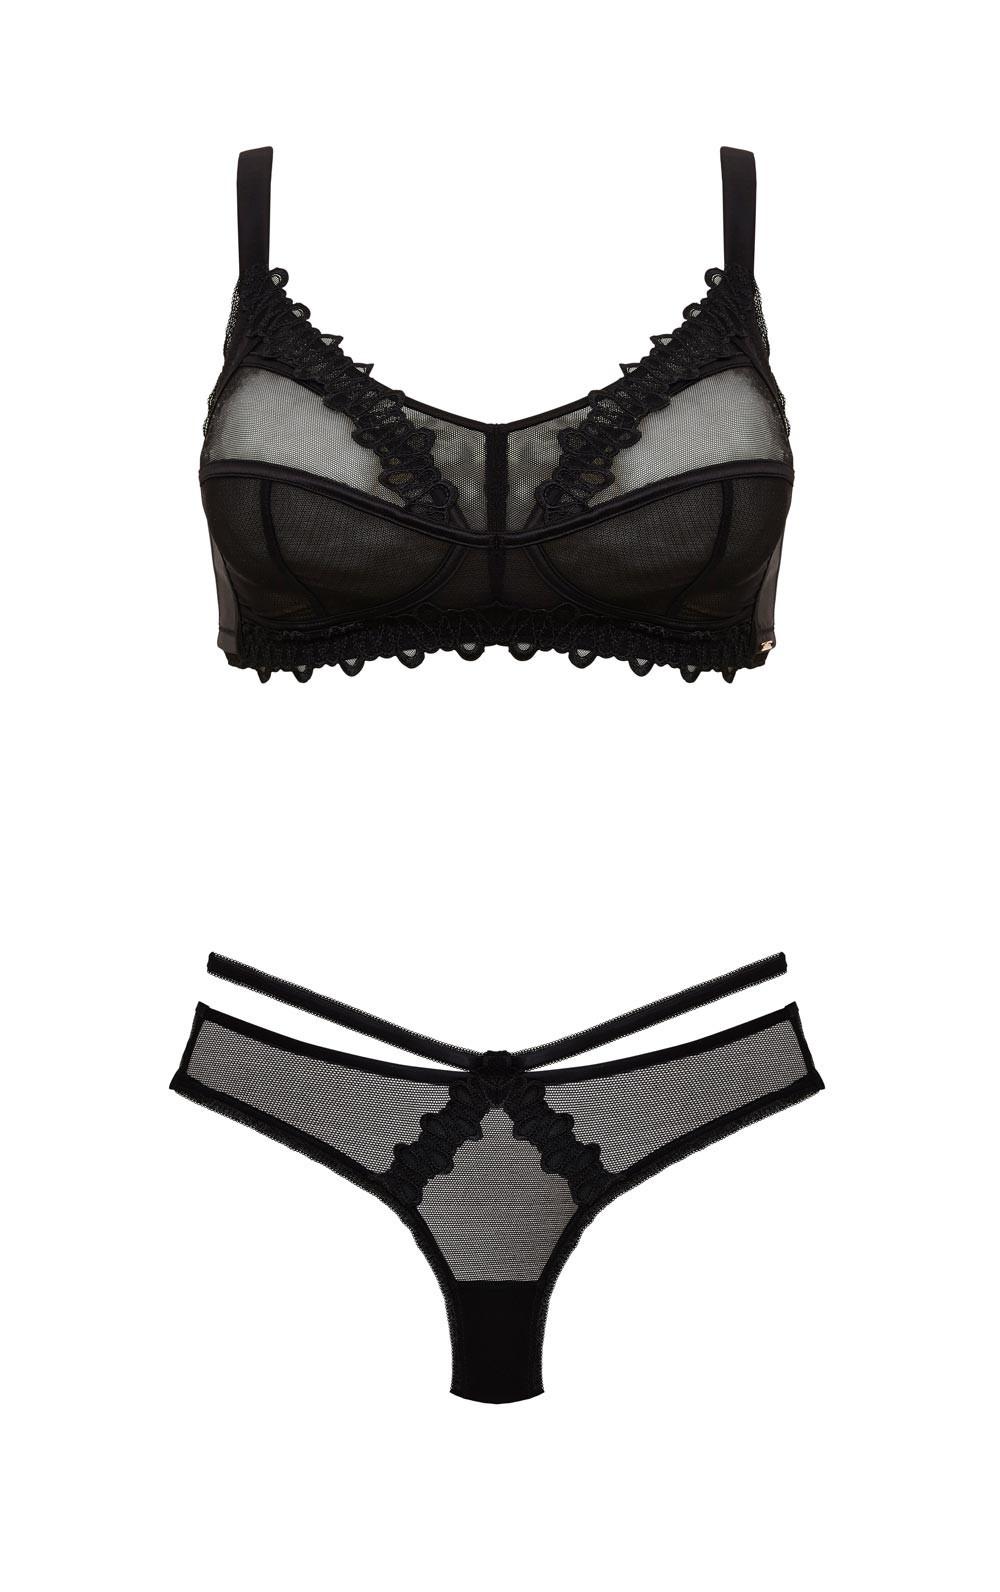 21 Sexy Honeymoon Lingerie Sets That Every Bride Needs to See - hitched ...